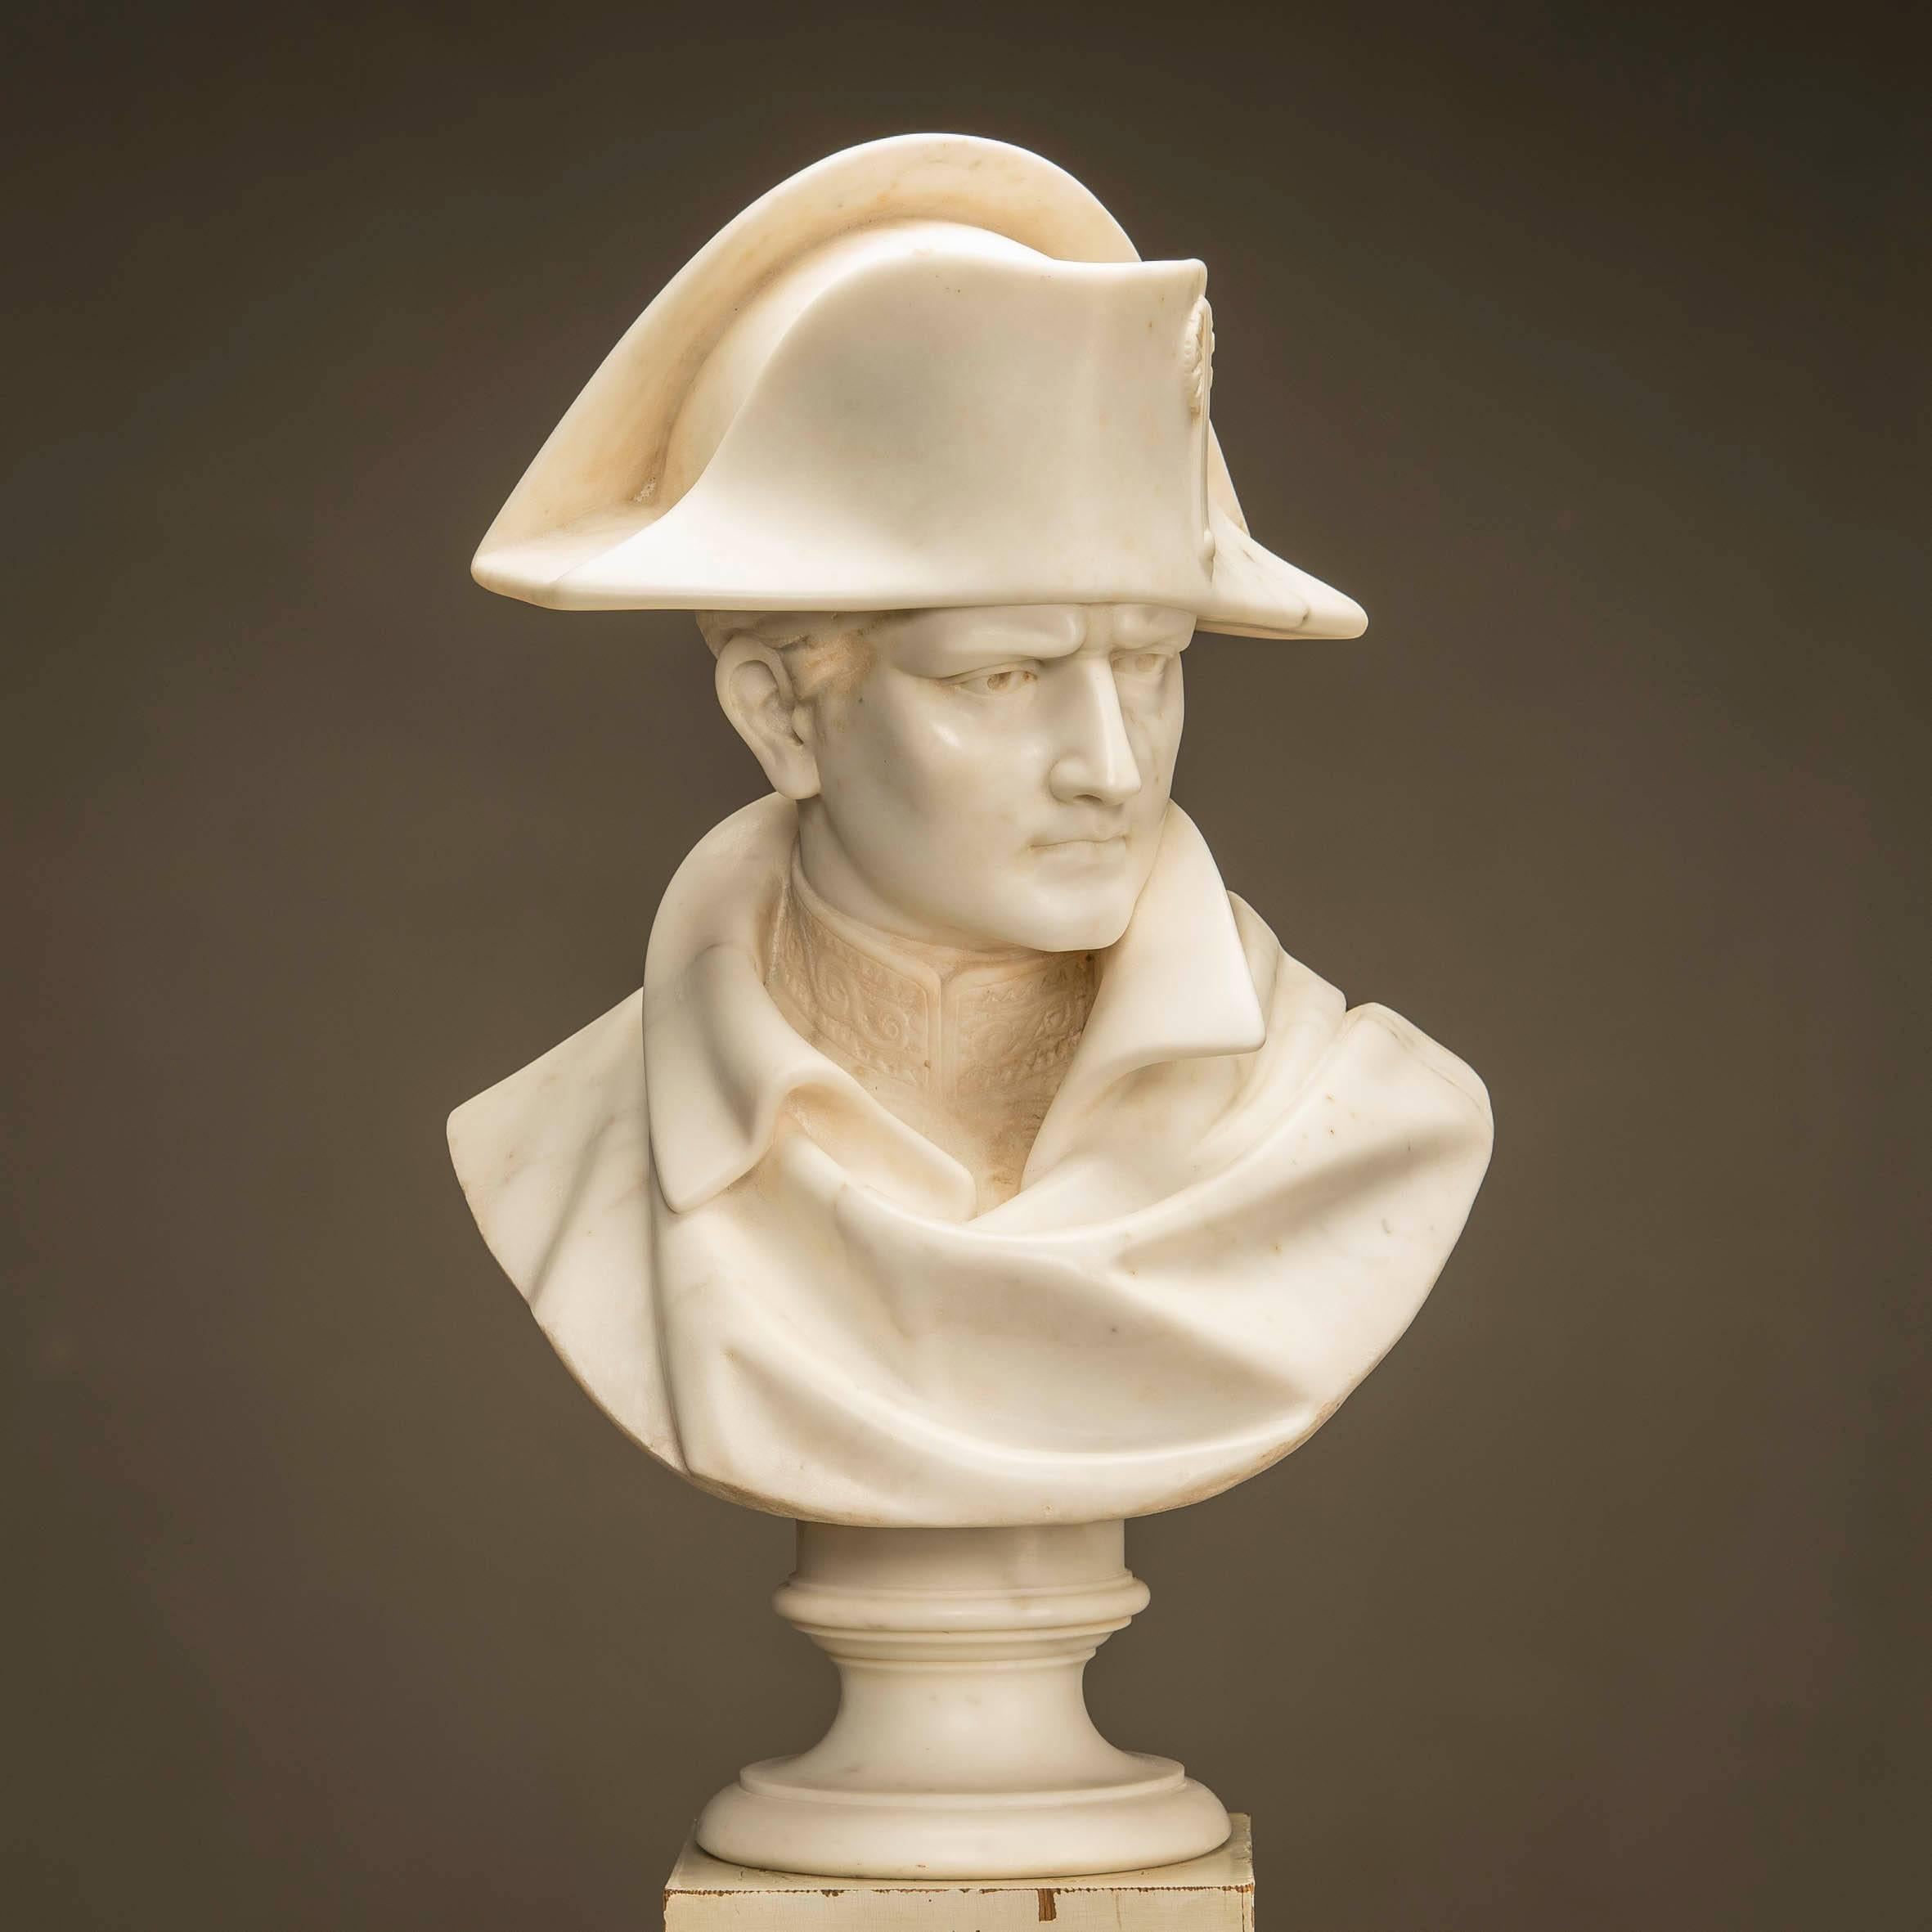 Bust of Napoleon made of white marble. 64 cm high. Signed: 'David'. Wood base (H 129, W 29, D 29) in the original white color with gilded woodcuts, among others 'N' for Napoleon. France 1840-1870.